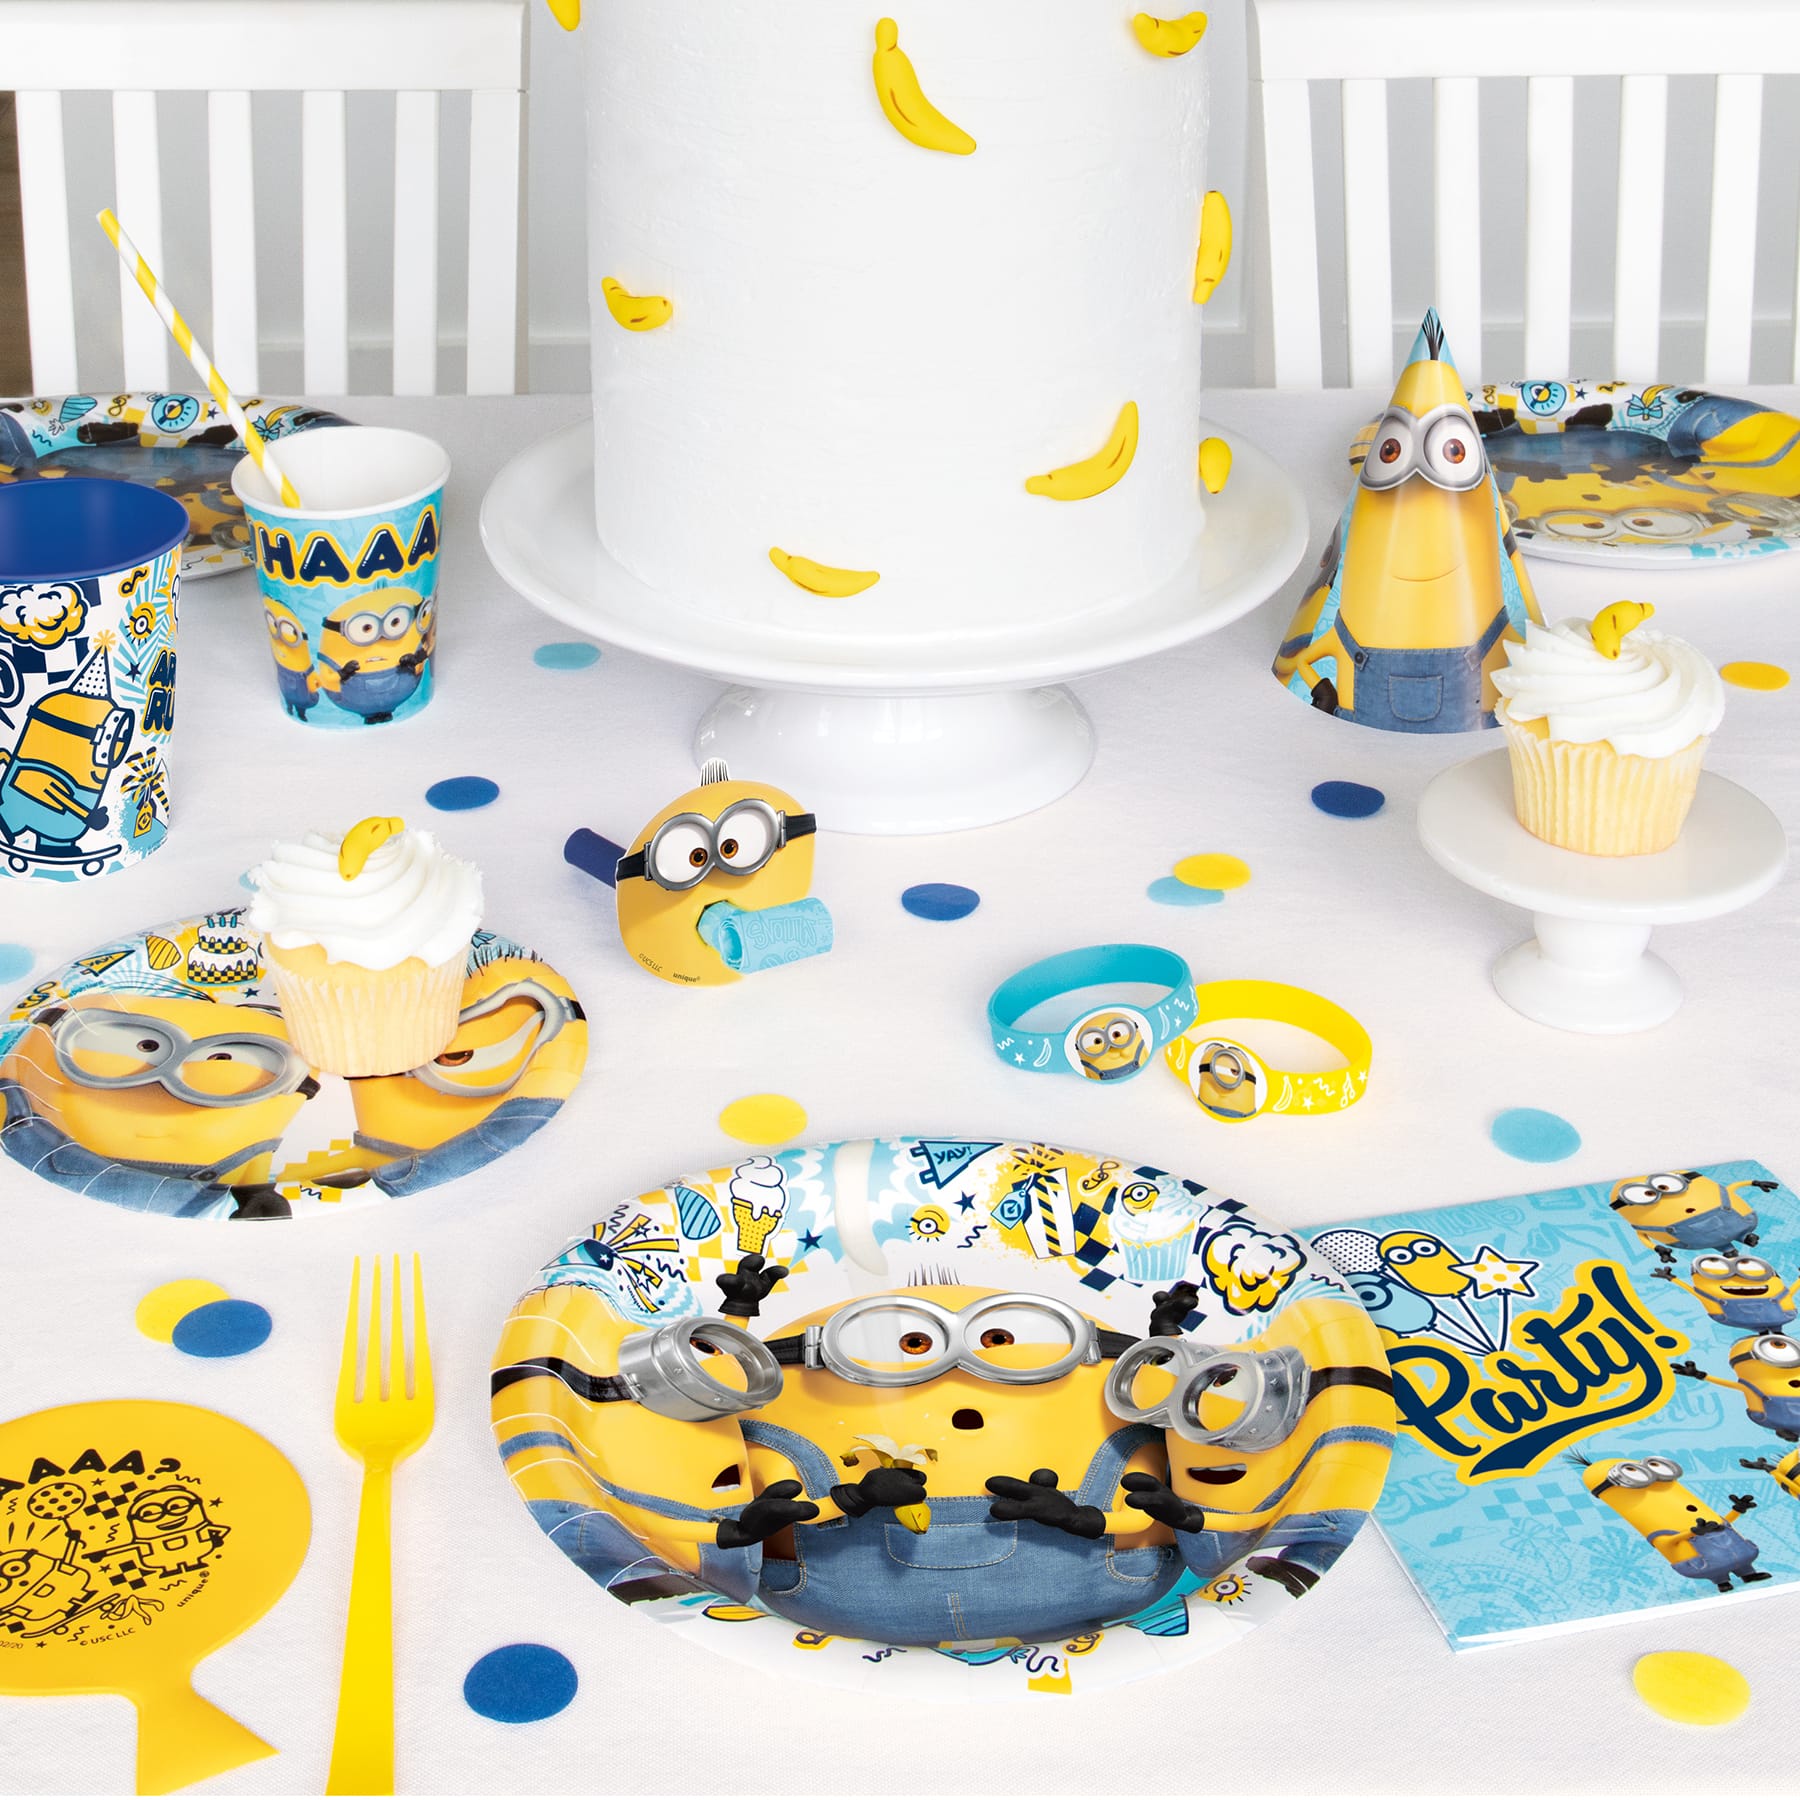 Minions Despicable Me Birthday Party Supplies Plates Table Cover Napkins New 